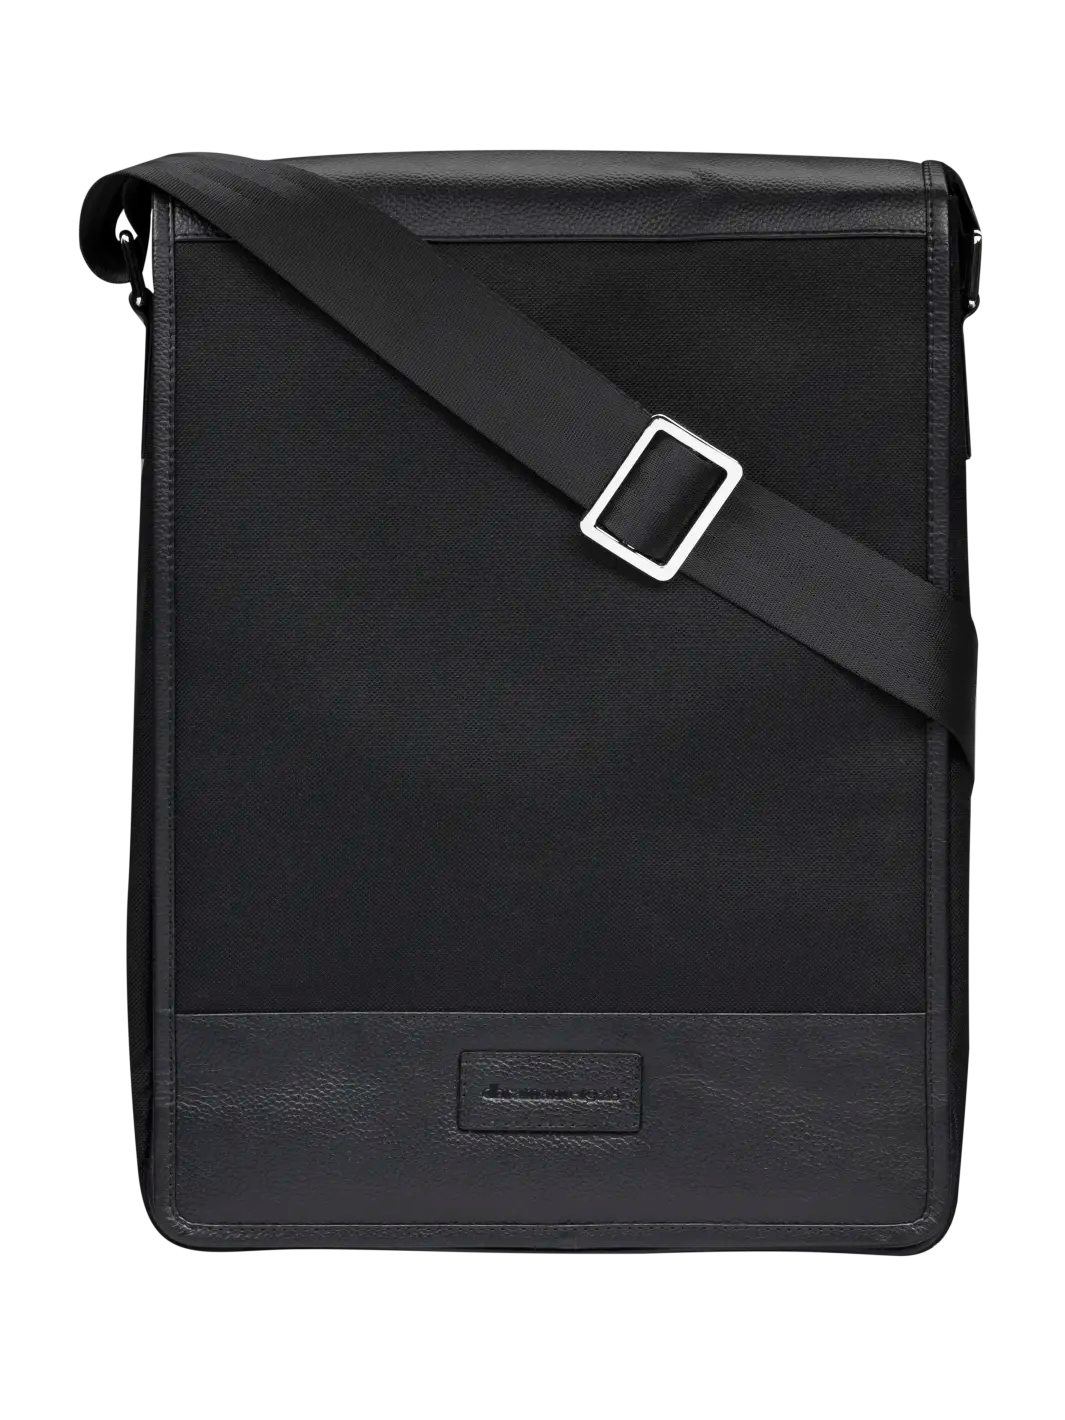 Avenue Classic Orchard Black Laptop up to 14" Bags